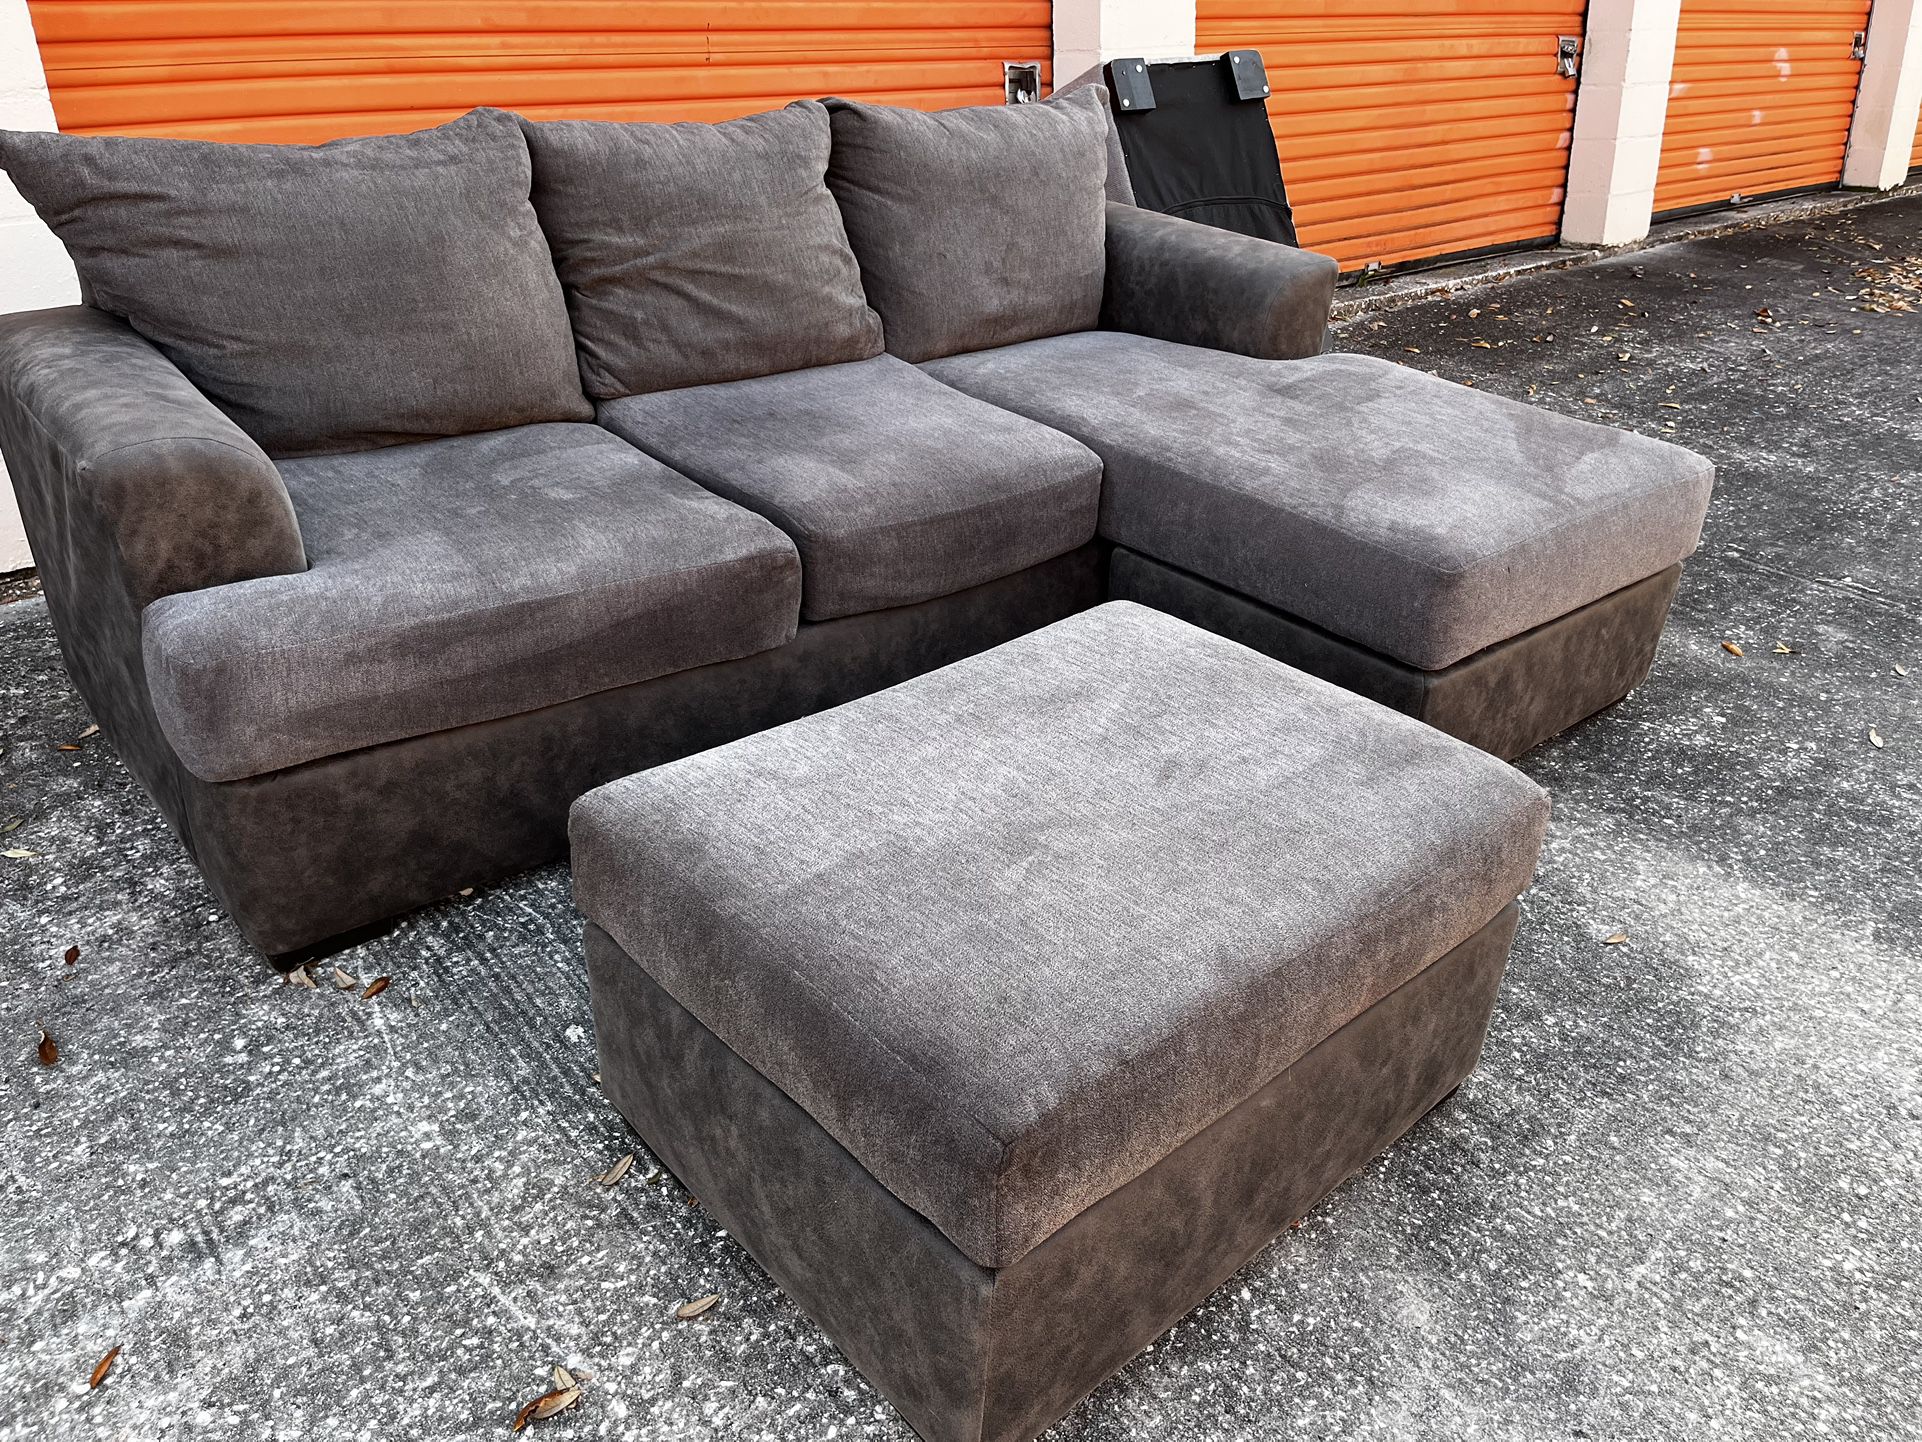 Nice gray Sectional Couch w/ ottoman. Delivery Available!